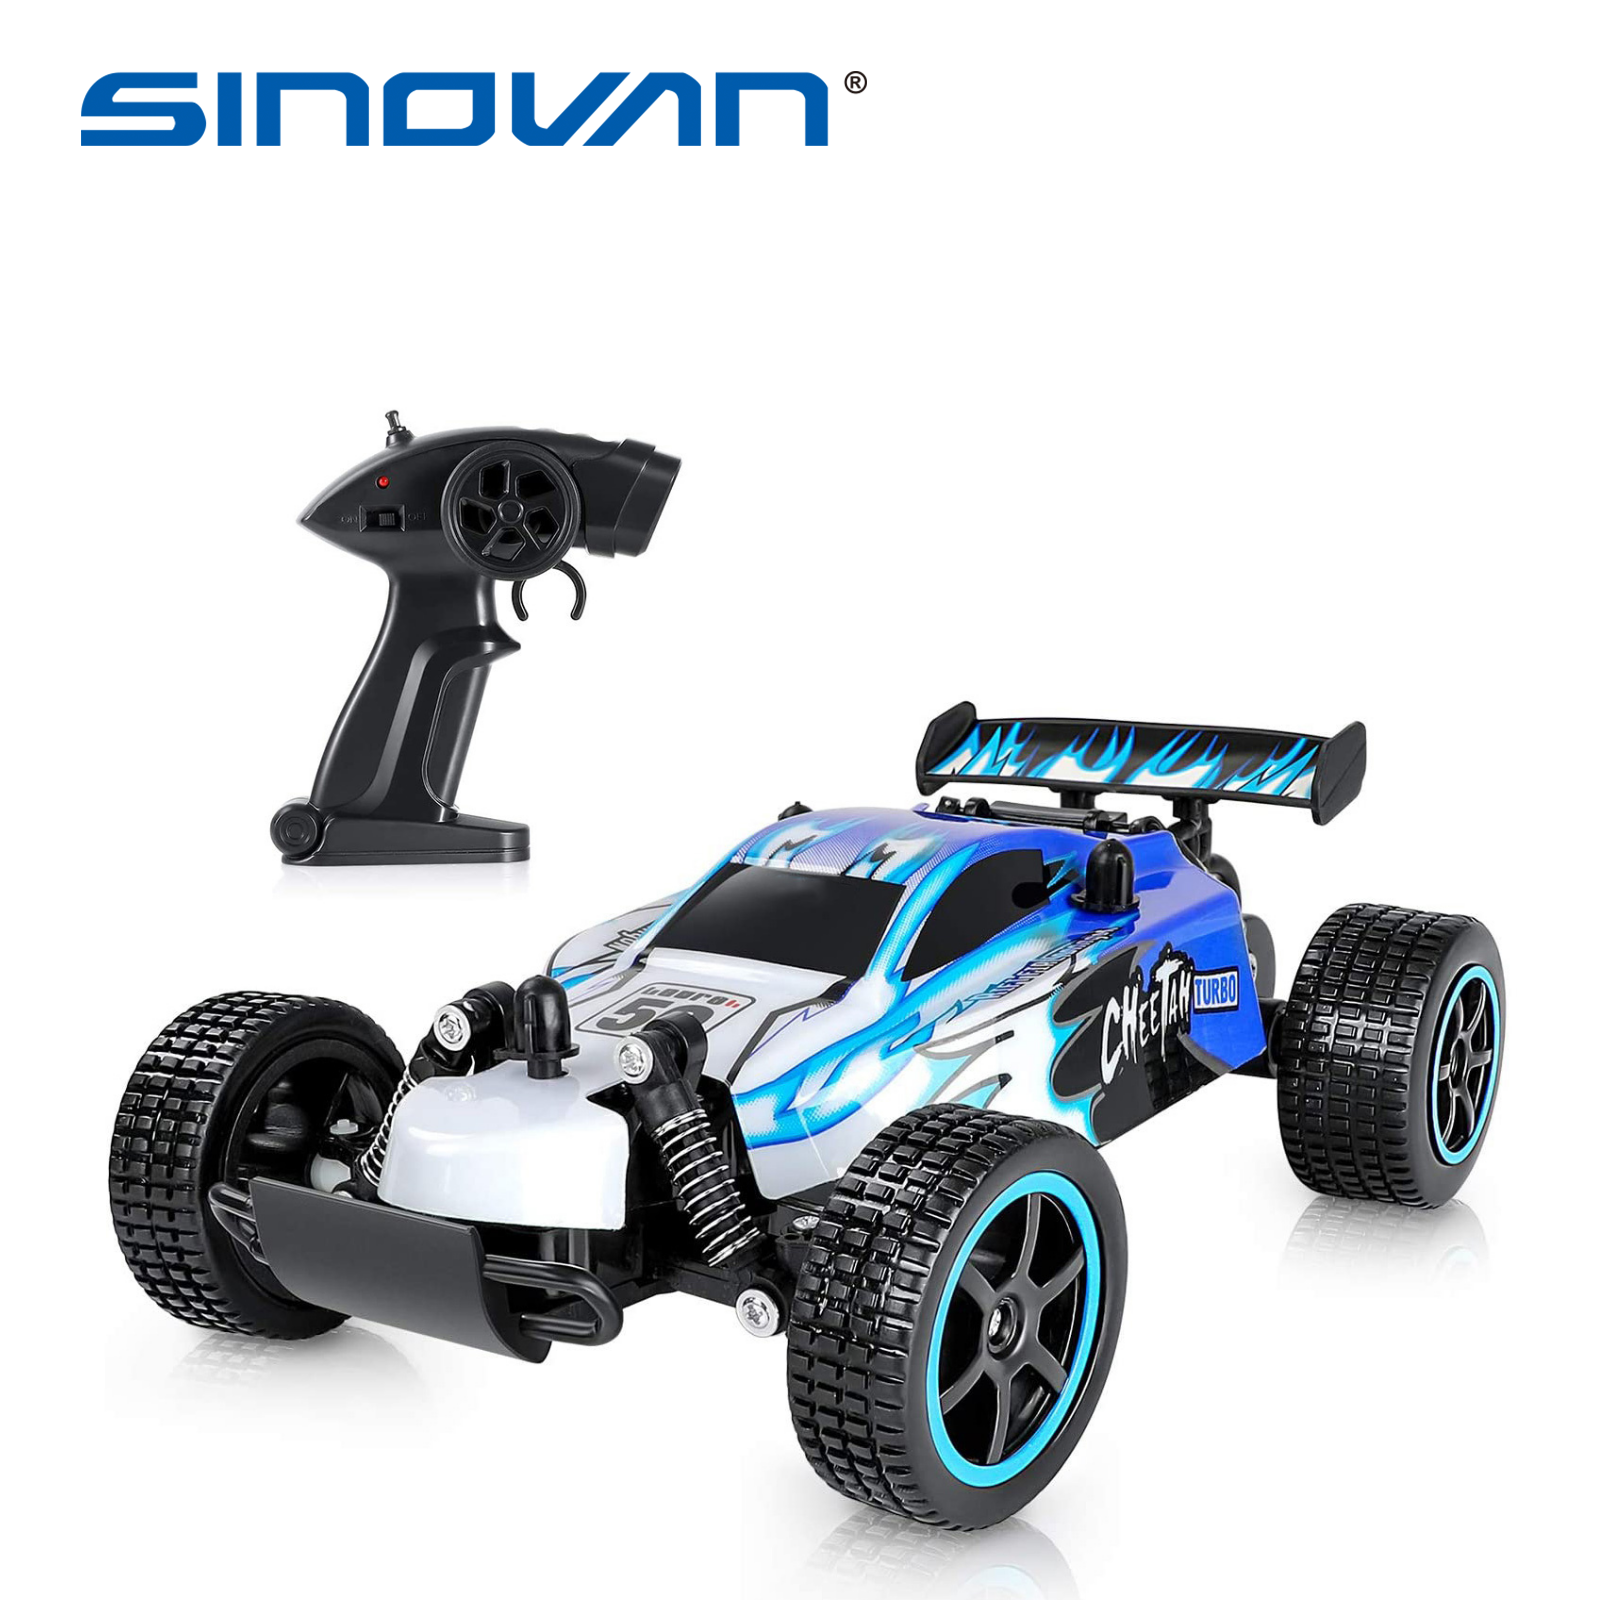 Puxida RC Cars-1:18 Scale Remote Control Car 4WD High Speed 20 Km/h All Terrains Electric RC Car Toy Off Road Vehicle Truck Crawler with Rechargeable Batteries for Boys Kids and Adults 